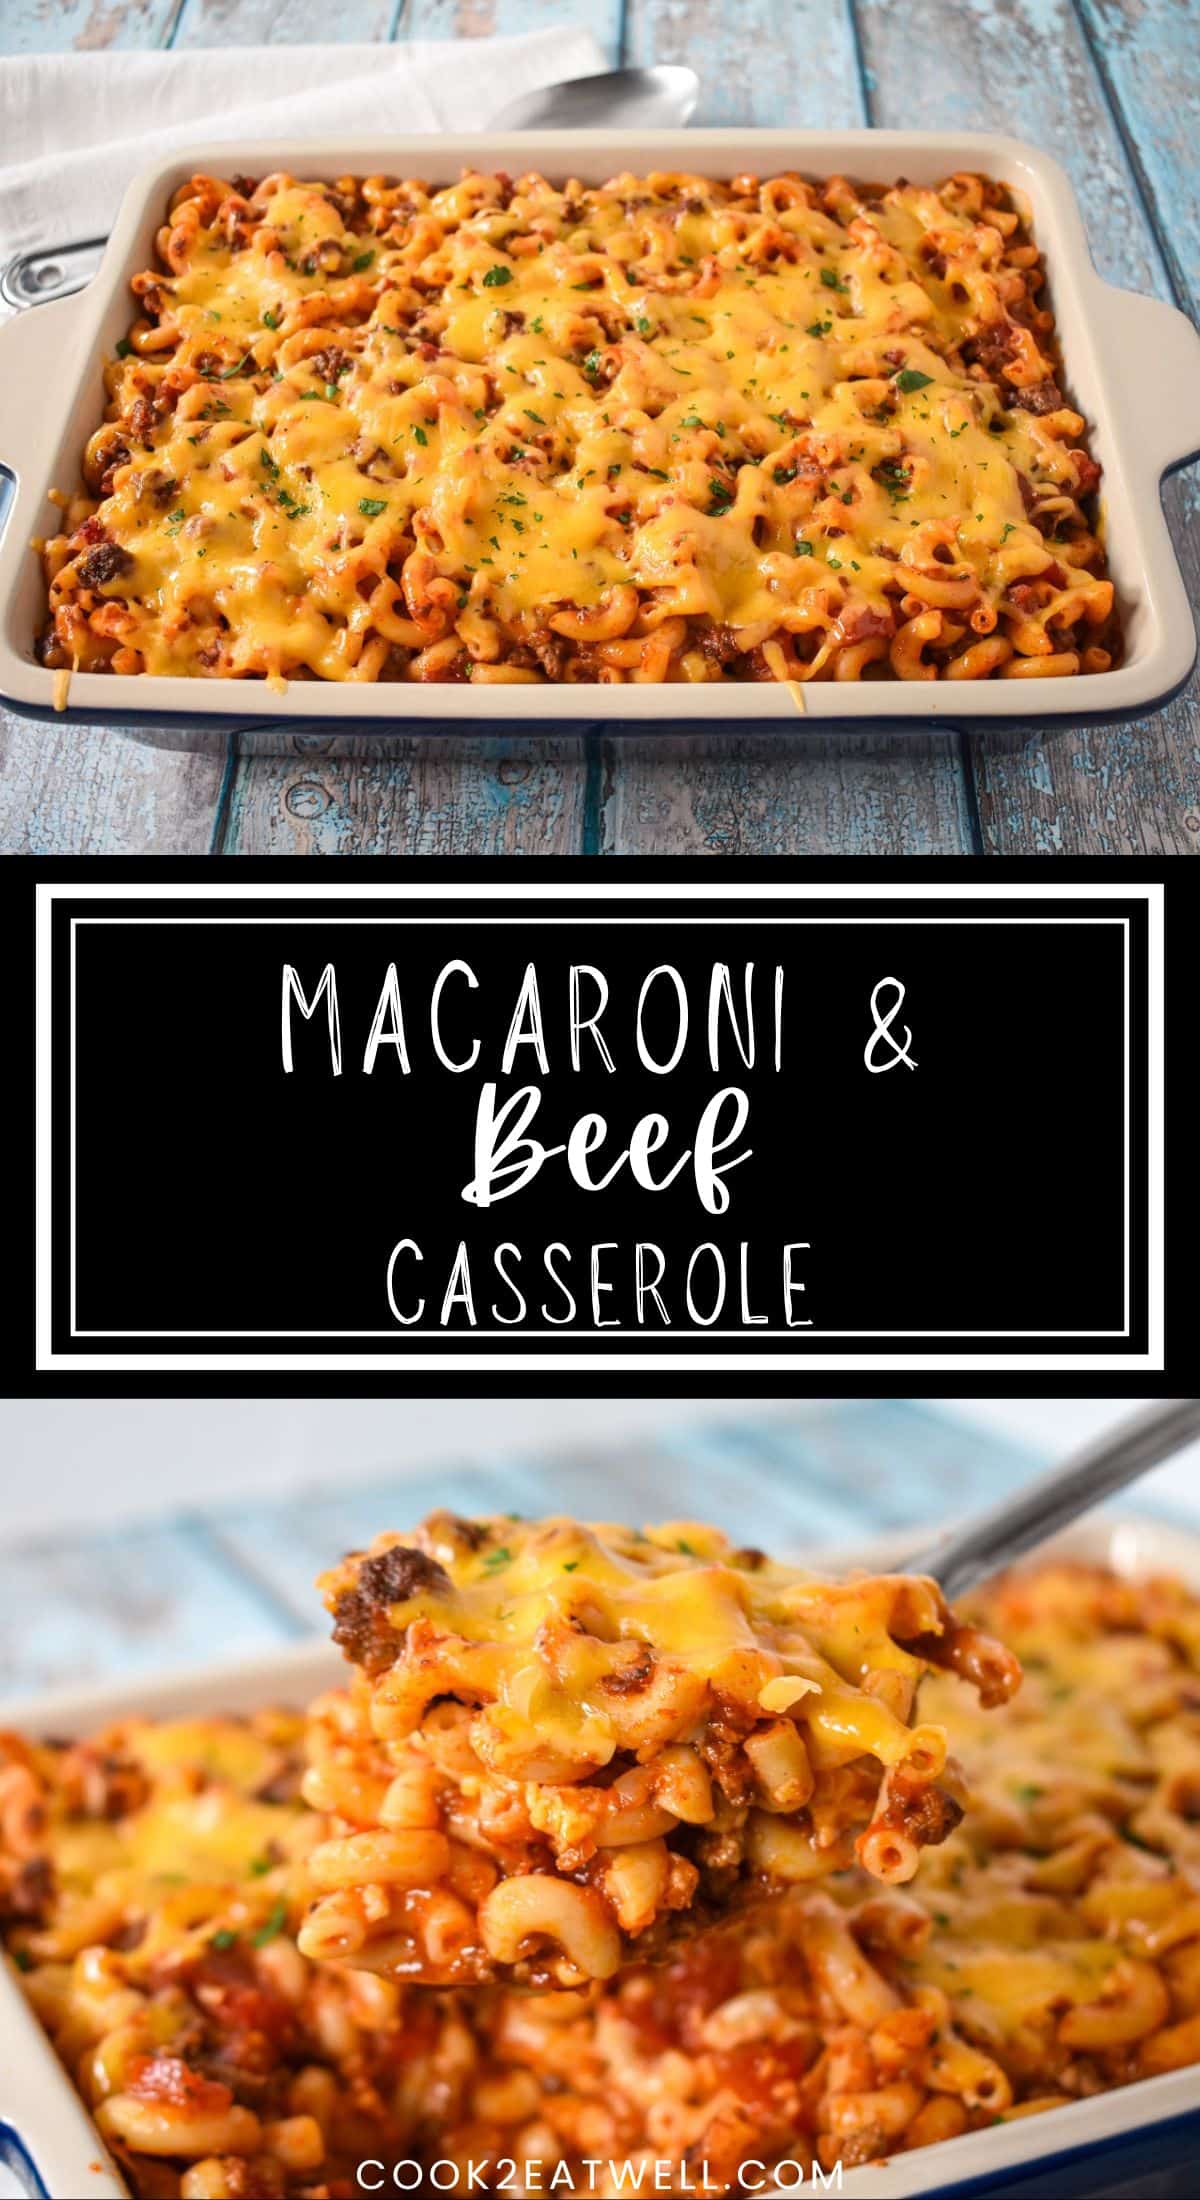 Beef and Macaroni Casserole - Cook2eatwell